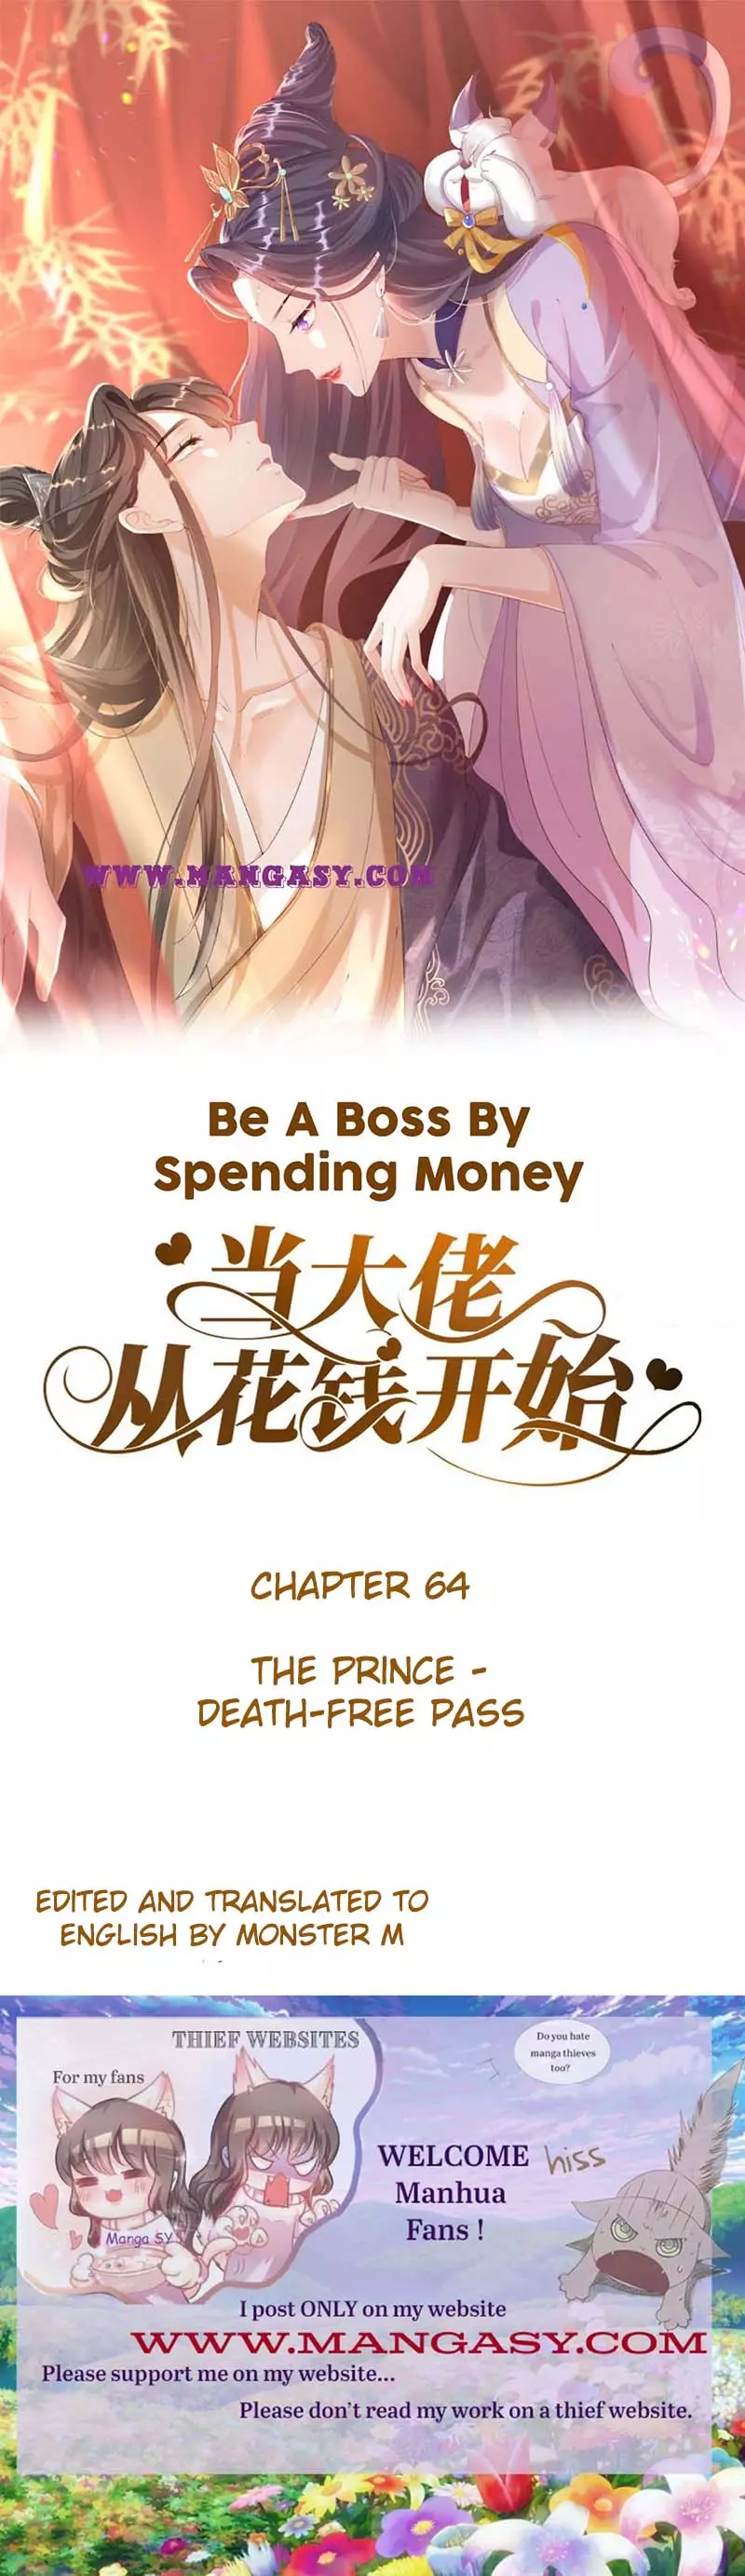 Becoming A Big Boss Starts With Spending Money - 65 page 1-1968843d